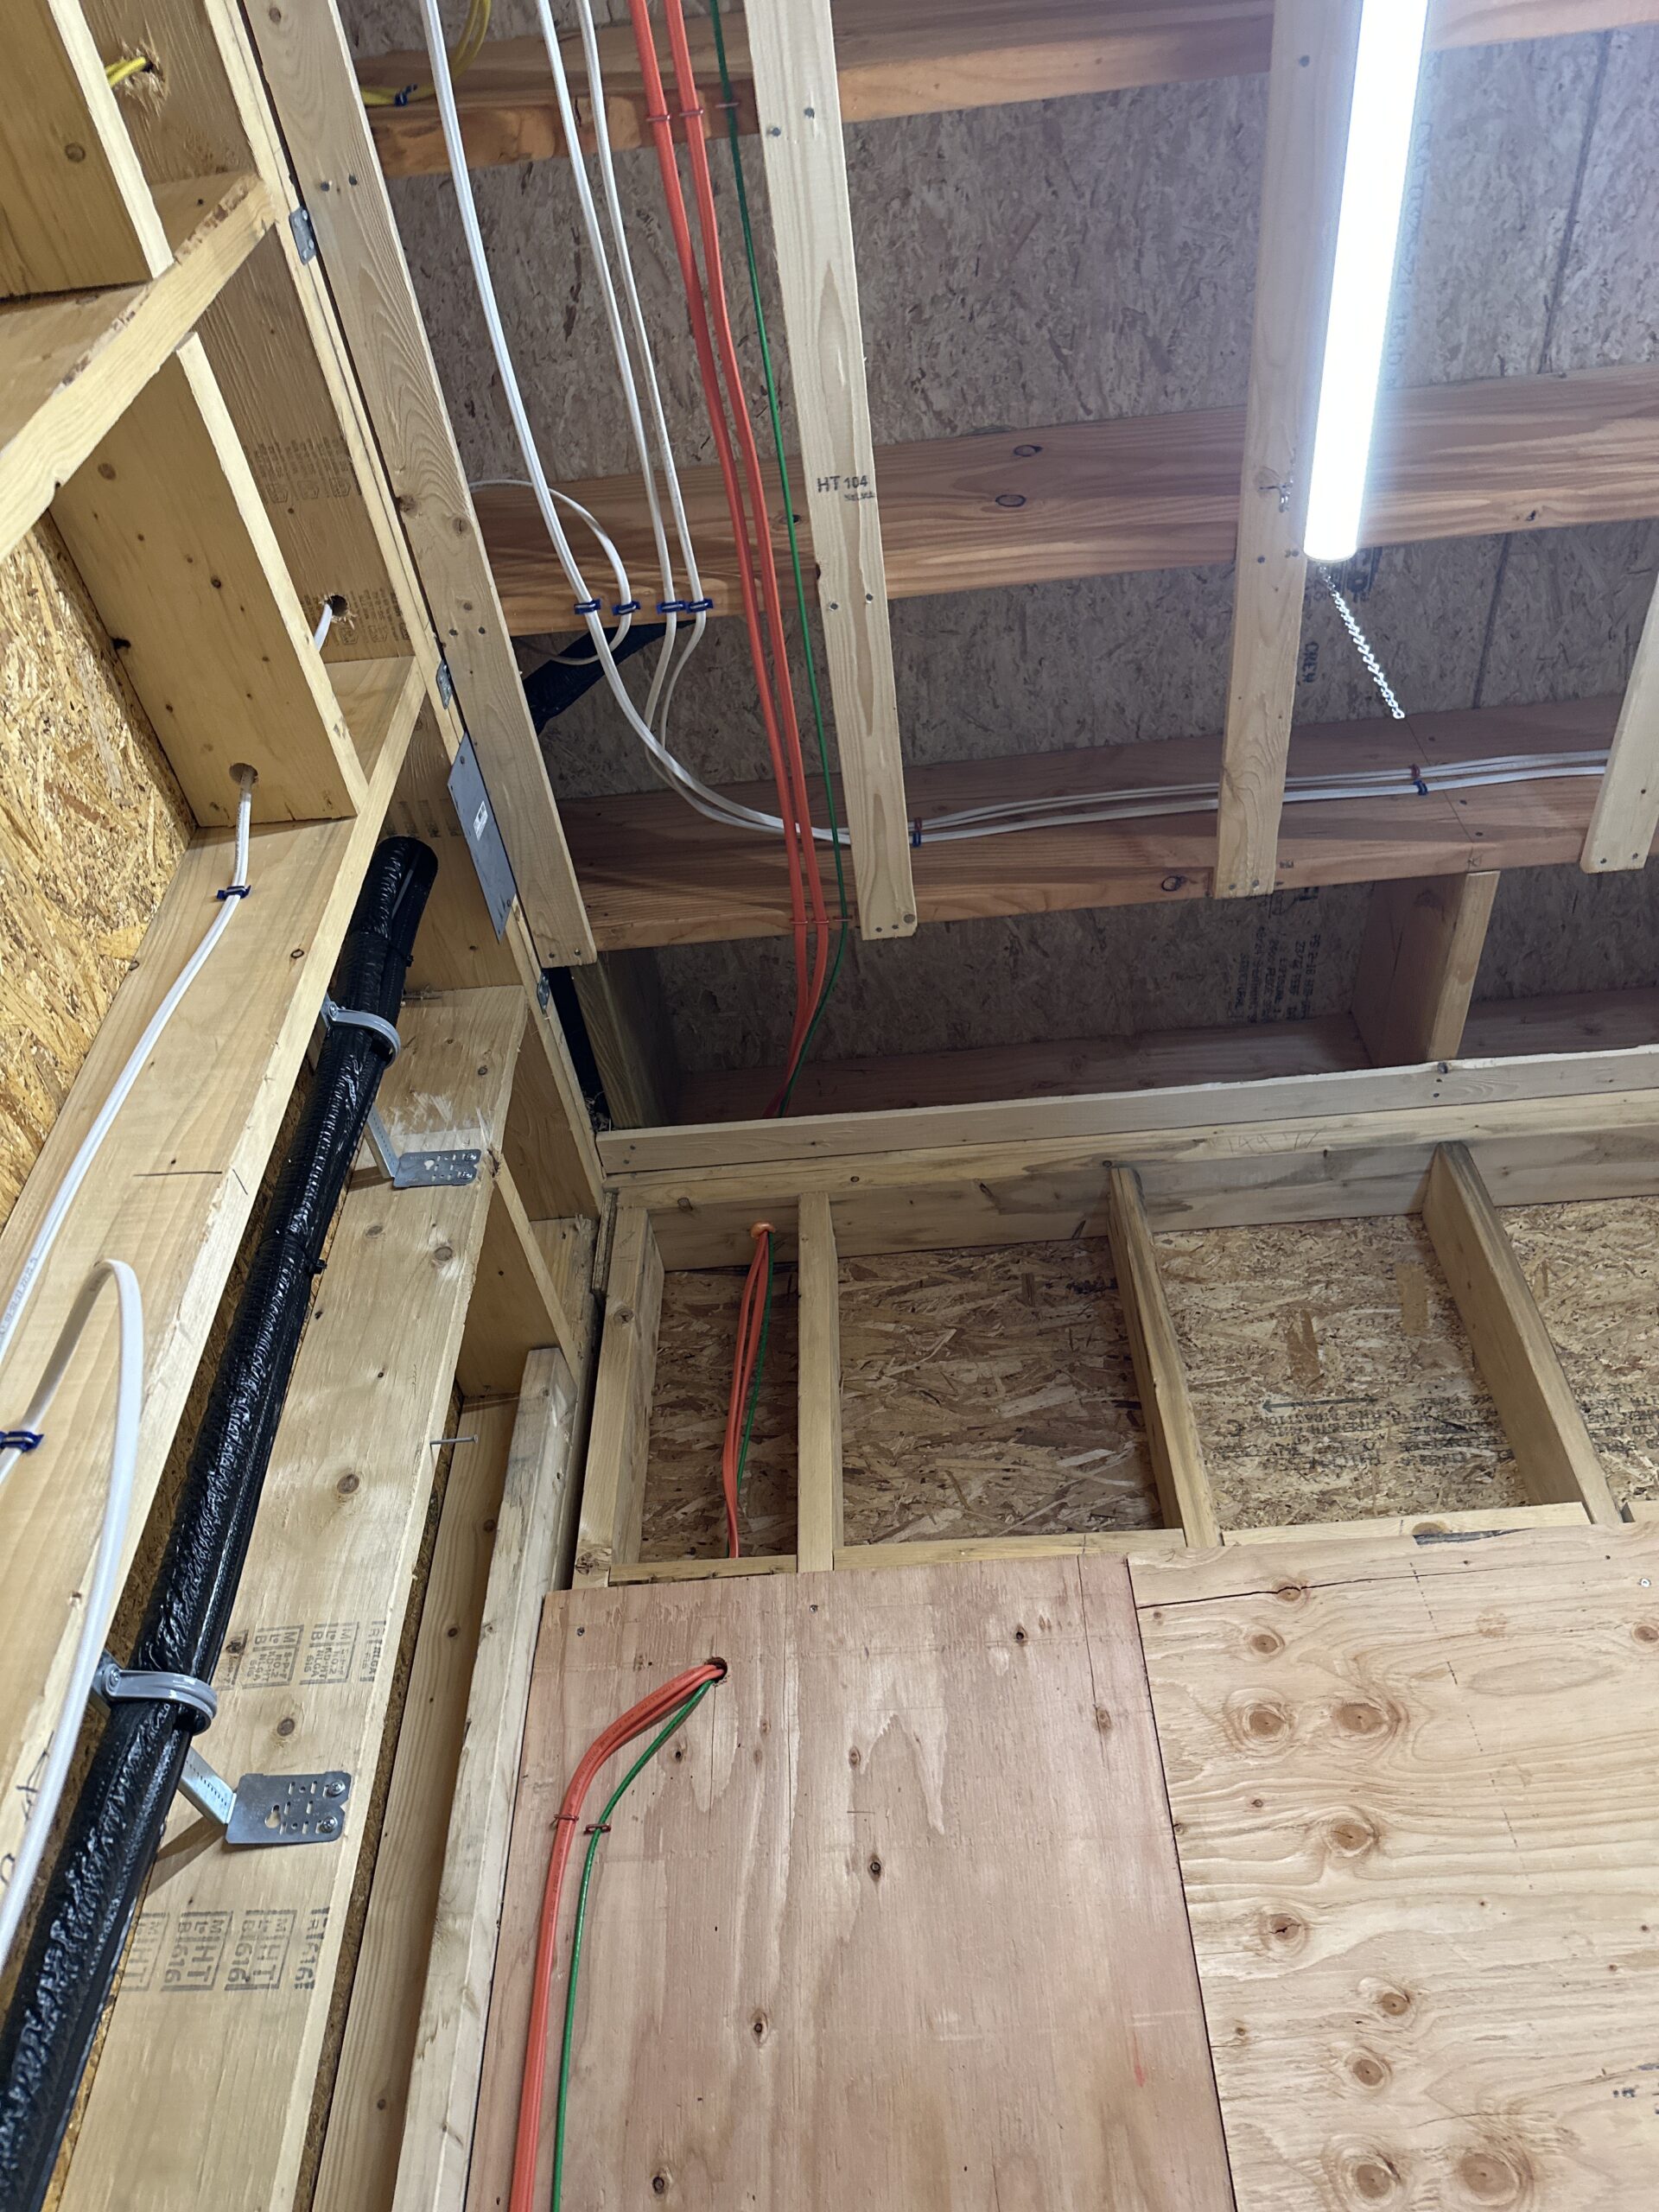 An image of the interior of a home under construction with exposed wiring.